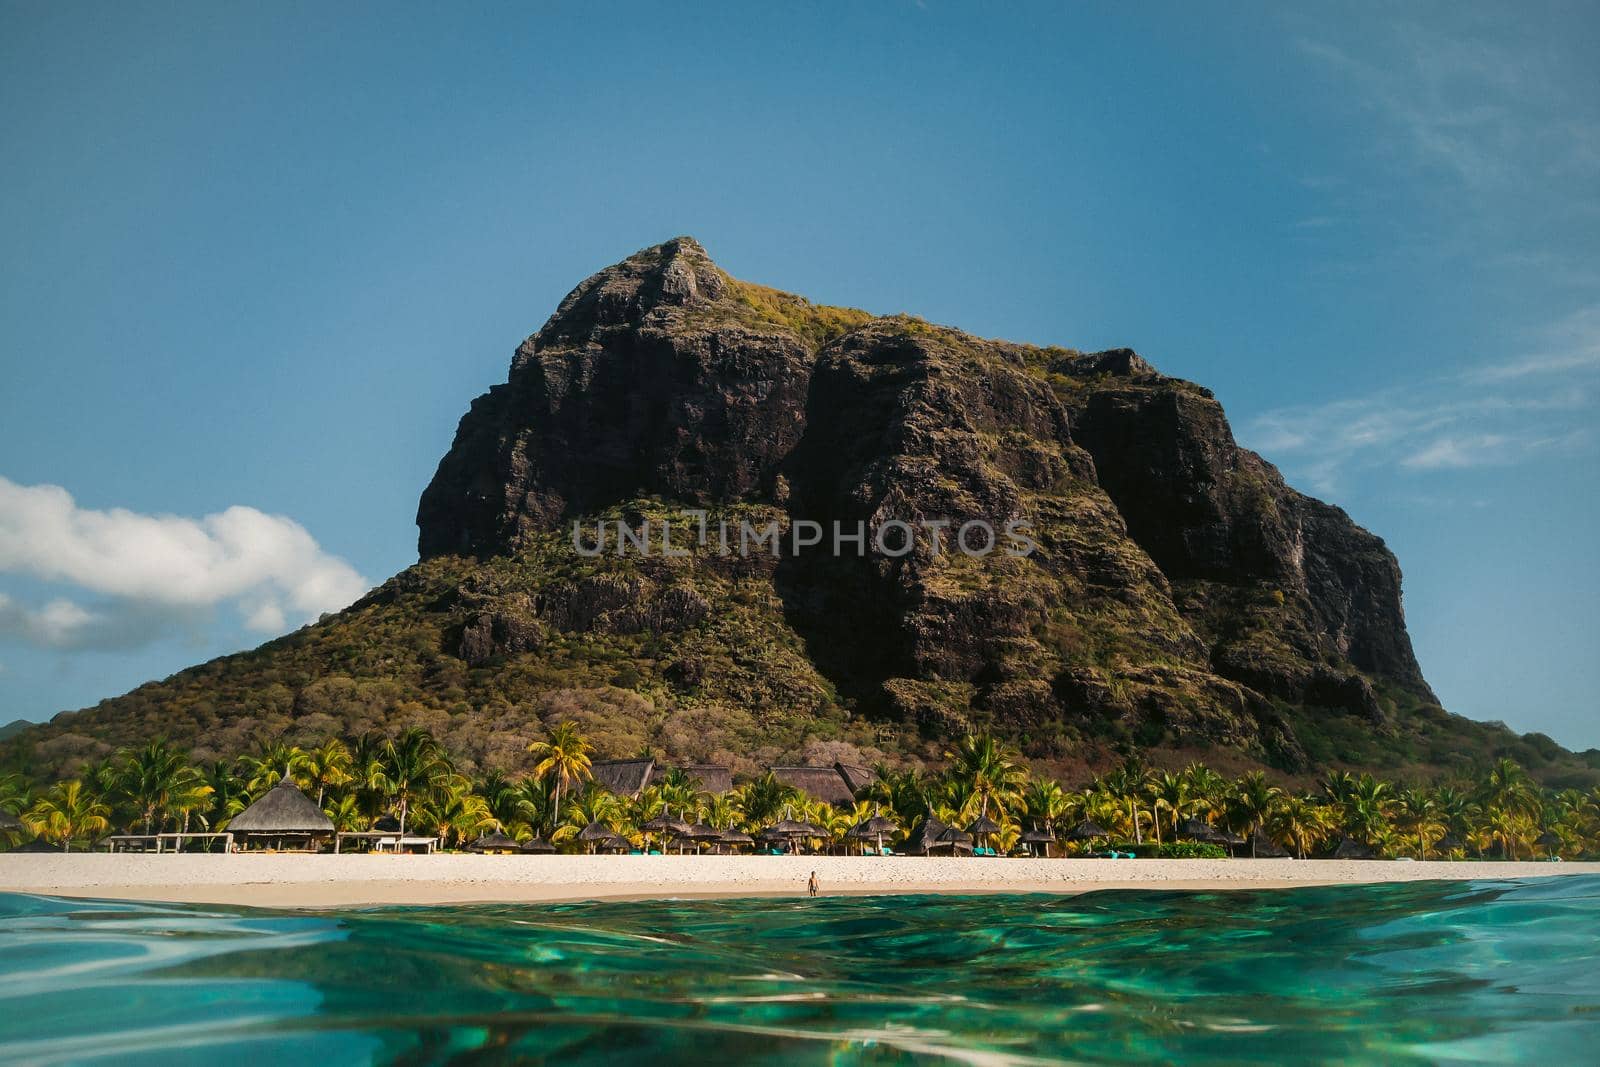 Beautiful beach, palm trees, and clouds on the horizon. Africa, Mauritius, South, near Le Morne.